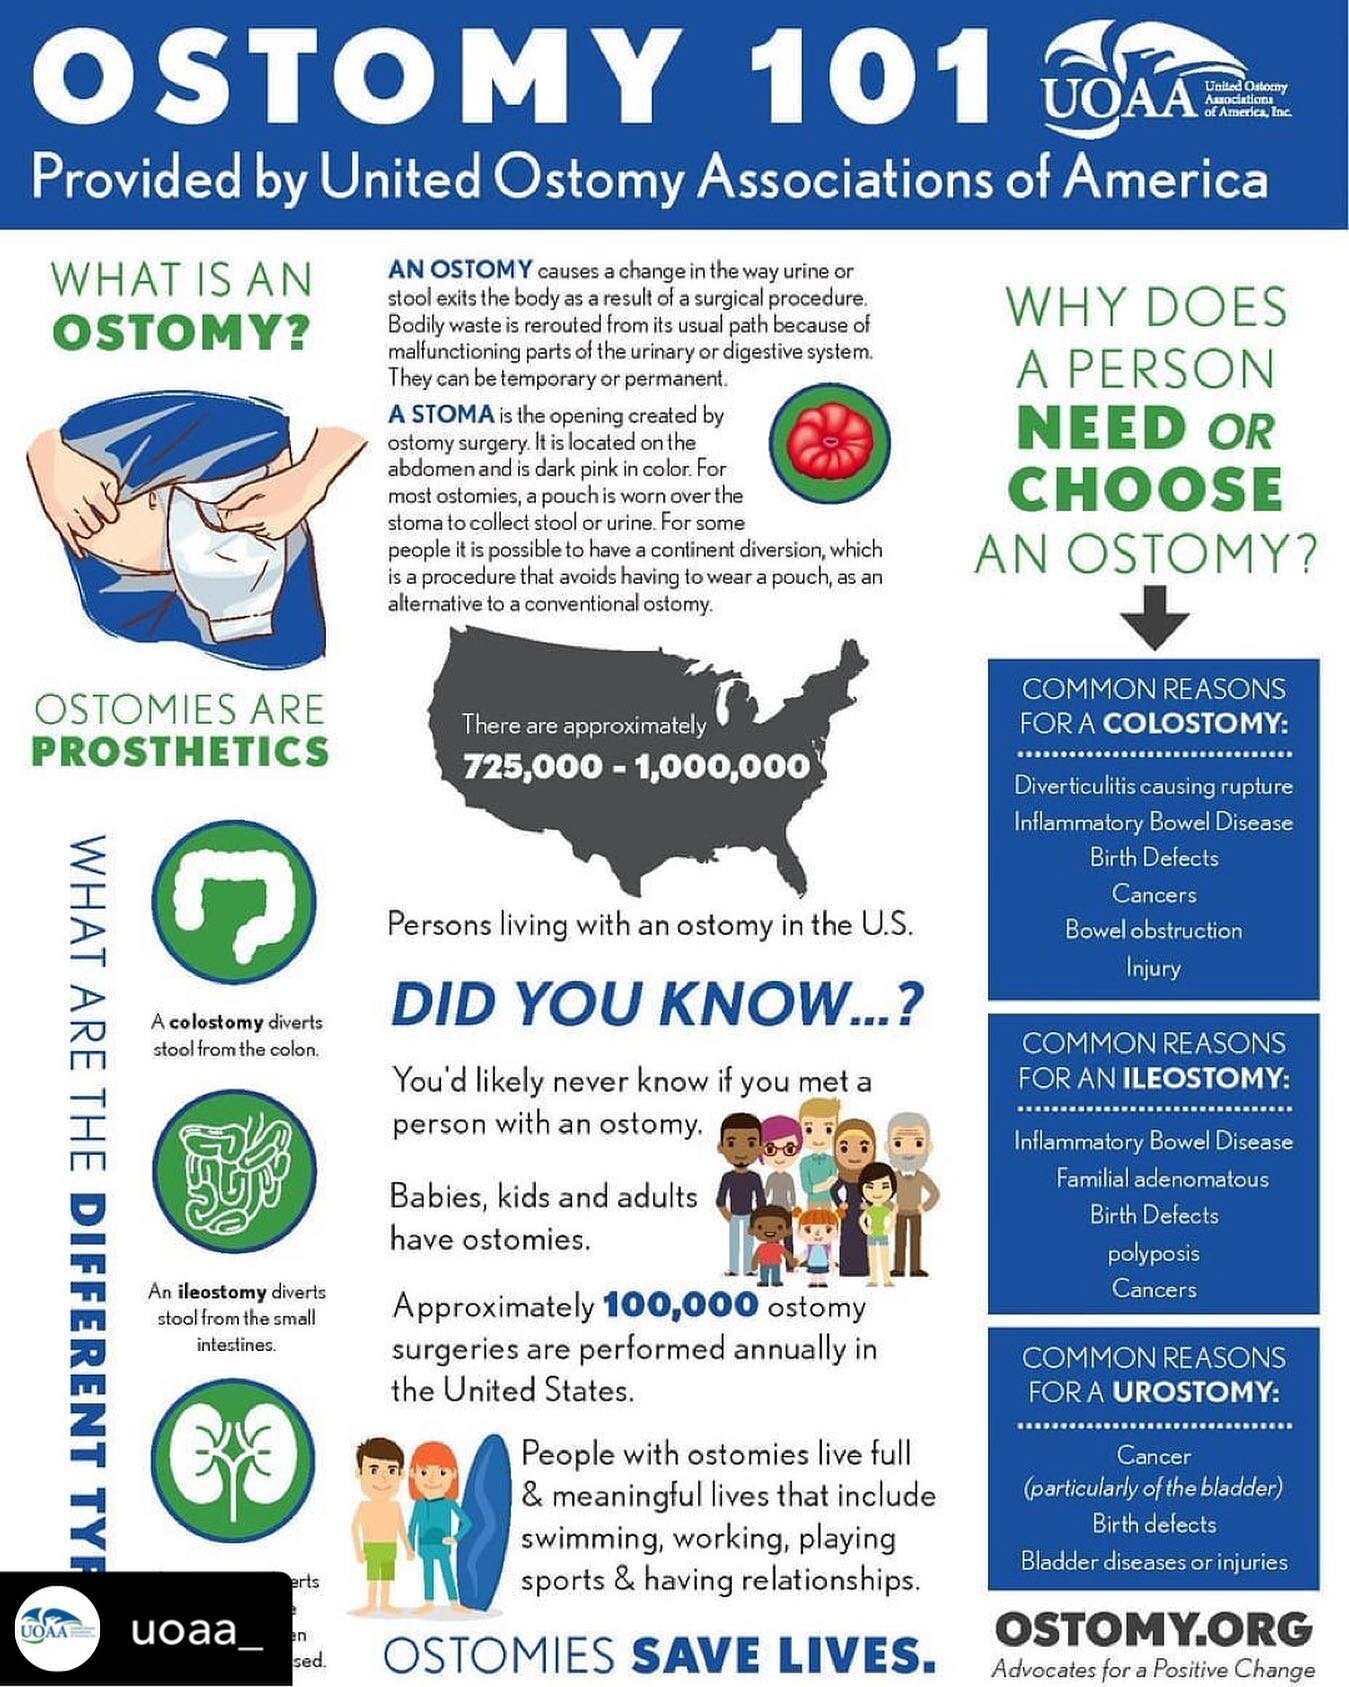 RePosted @withregram 
&bull; @uoaa_ 
&bull; An easy way to share some ostomy facts this #OstomyDayUSA to raise much needed #ostomyawareness 
USA Ostomy Facts 
&bull;
&bull;

Best,
 IOA 20/40 Focus Group
.
.
.
.
.
.

.
.
.
.
.
#ostomia #ostomias #osto